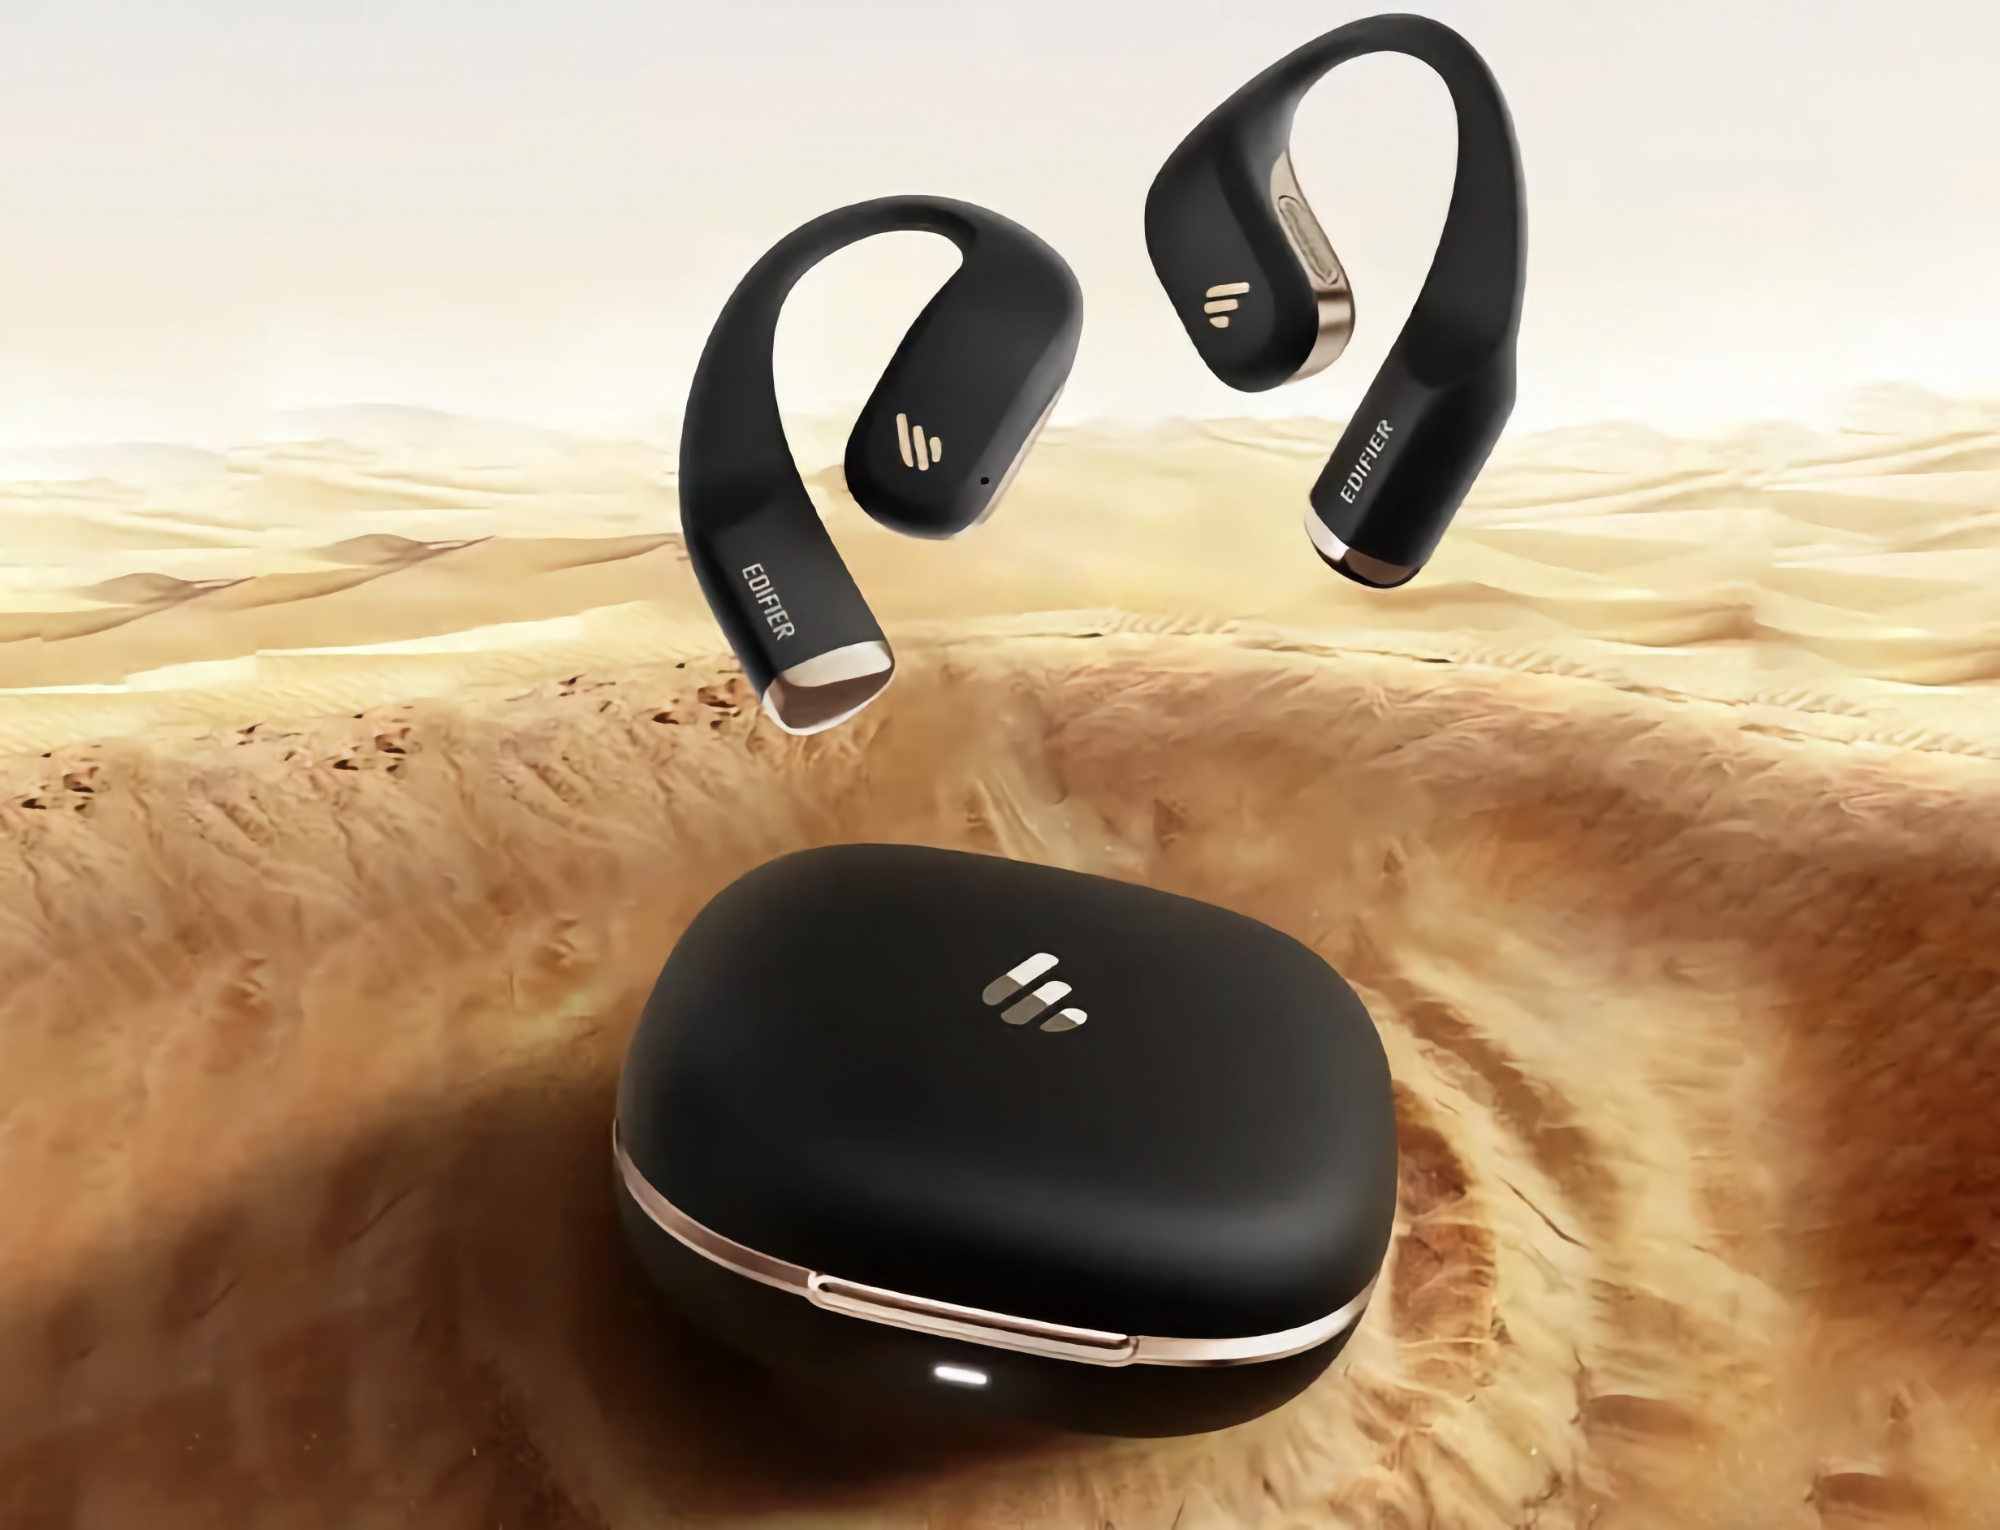 Edifier has unveiled the Comfo Fit II wireless headphones with an open design, IP55 protection and up to 40 hours of battery life